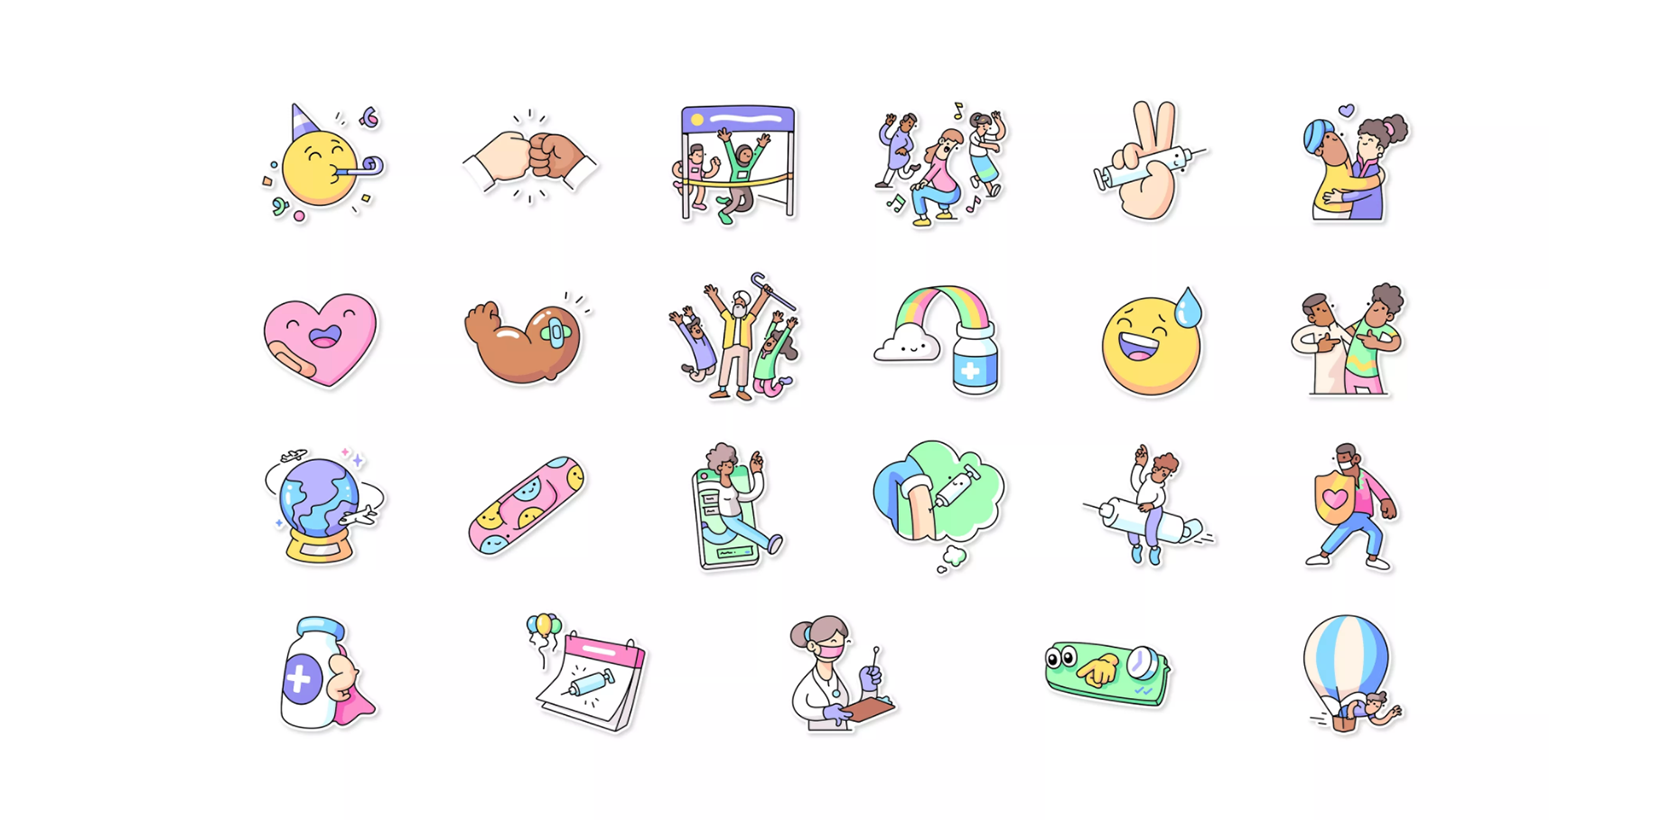 WhatsApp Vaccines for All Sticker Pack